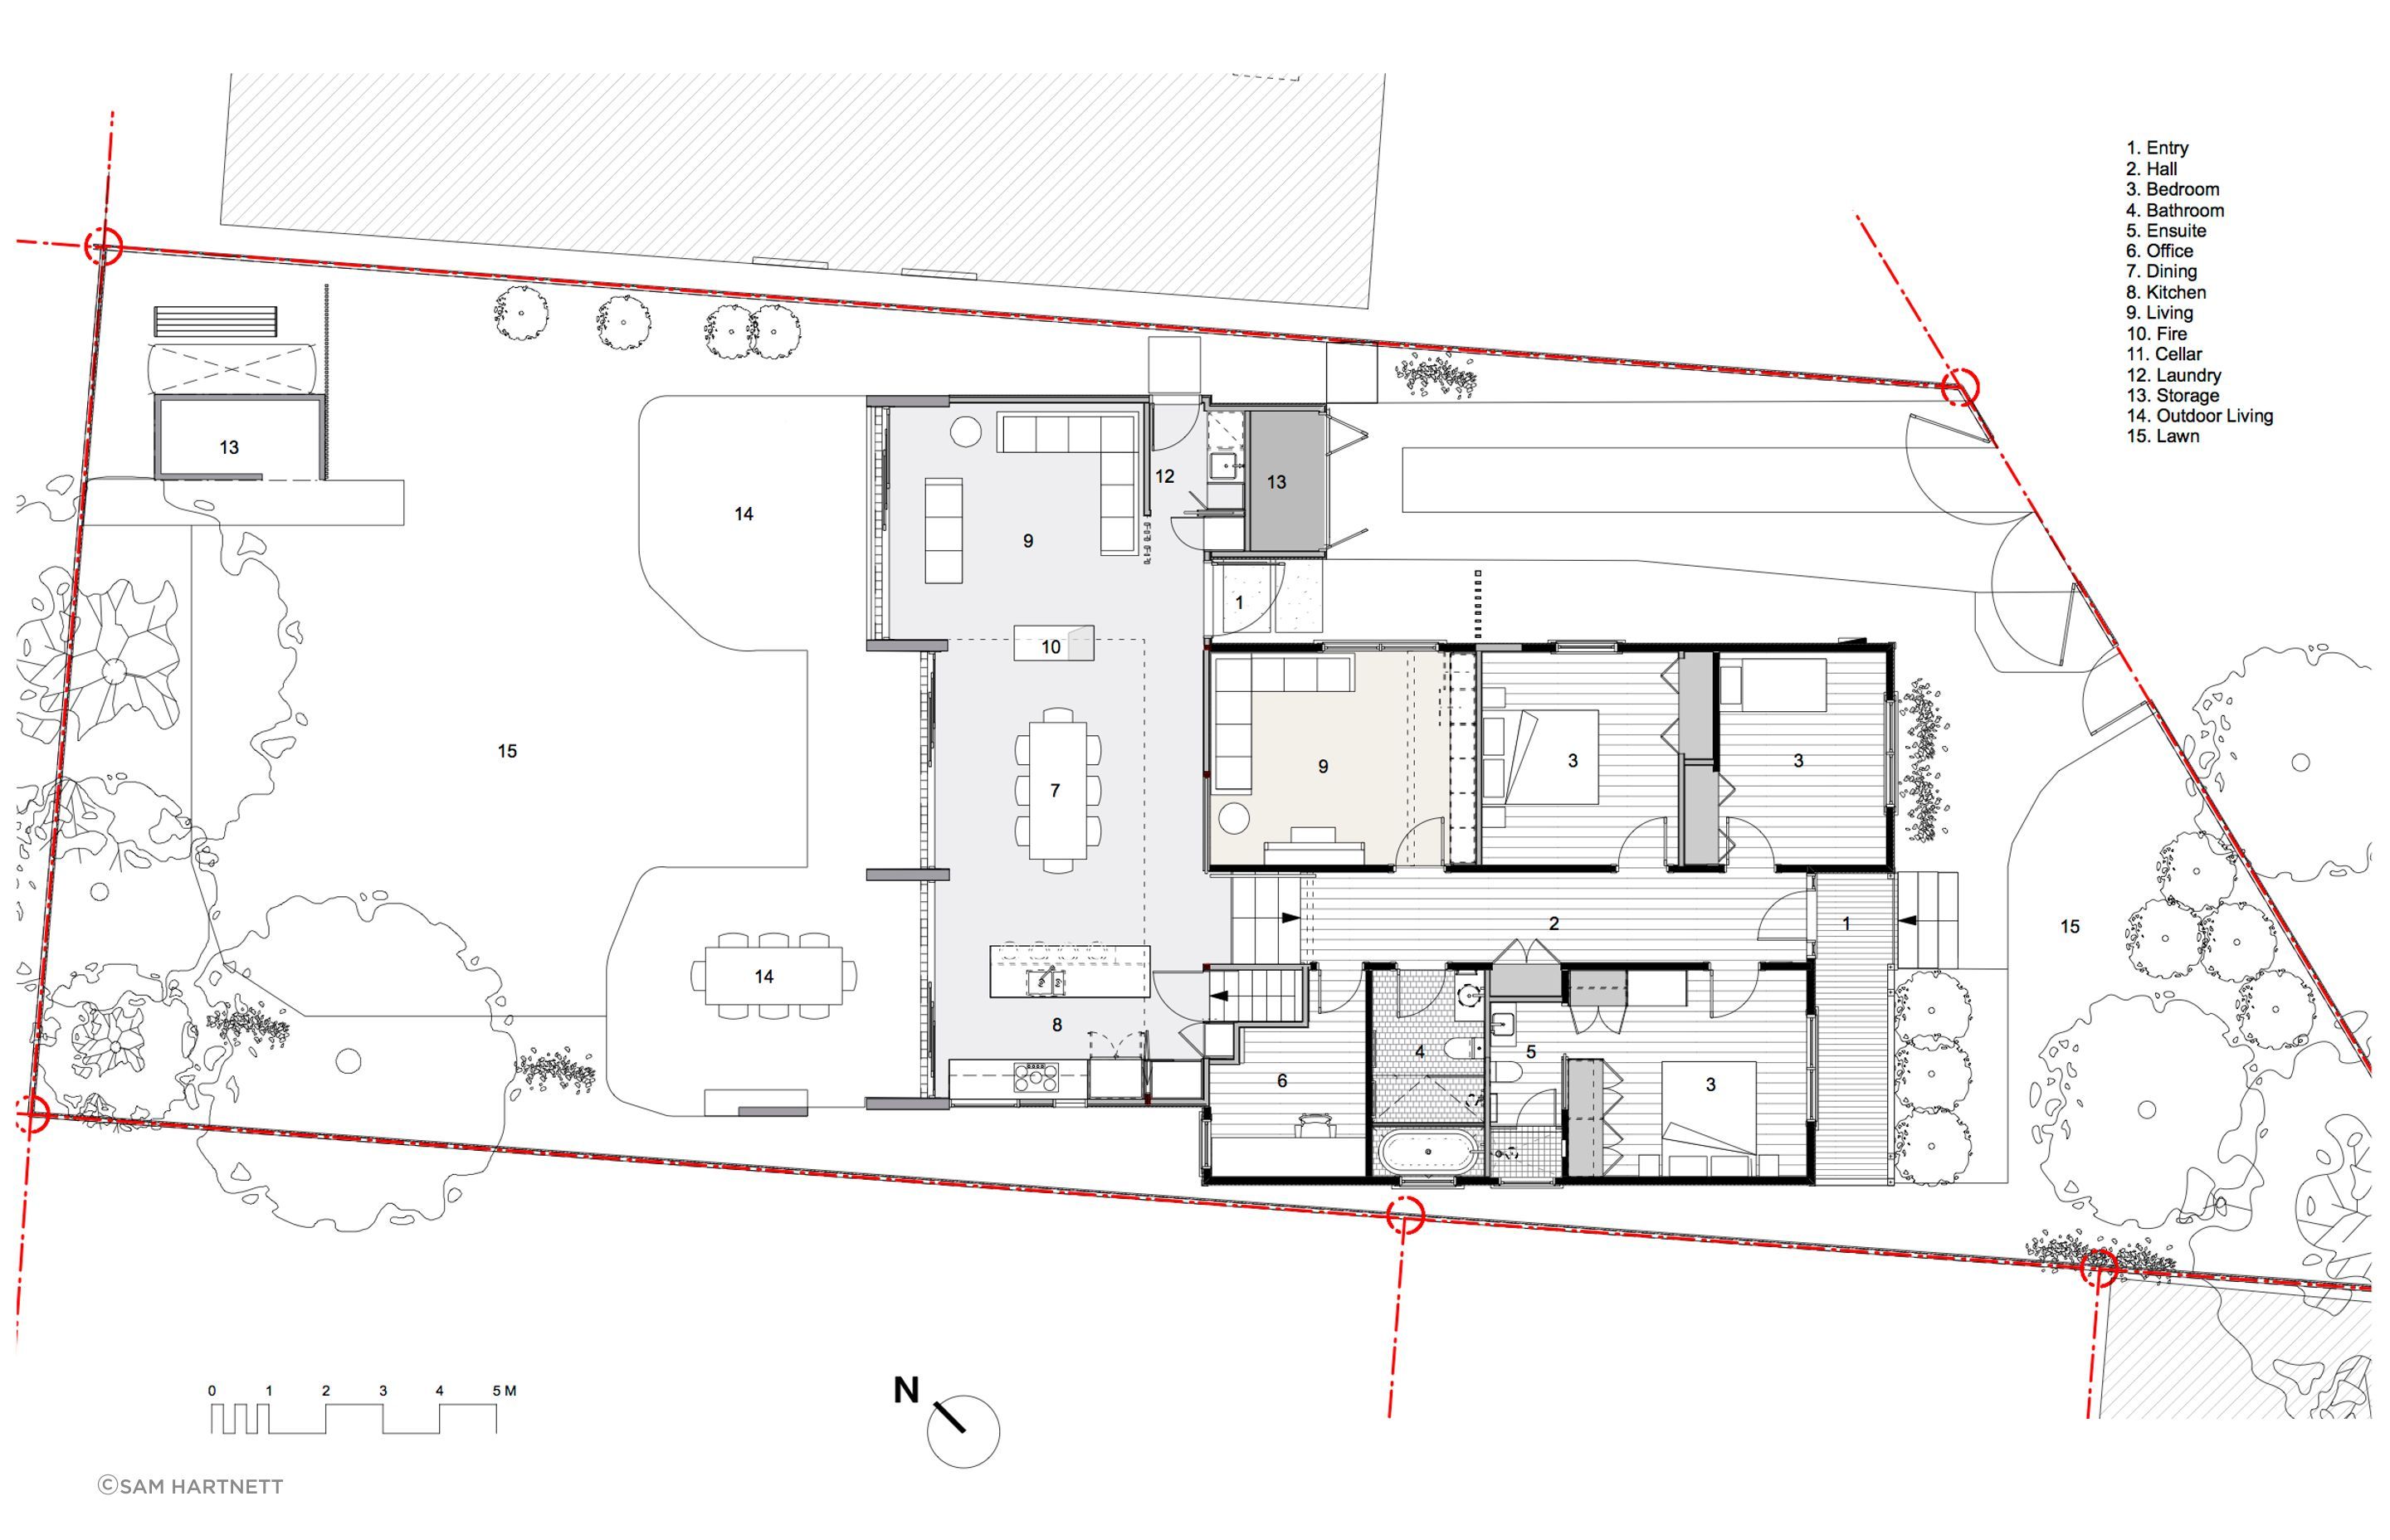 PP-100-Proposed Gnd Floor Plan